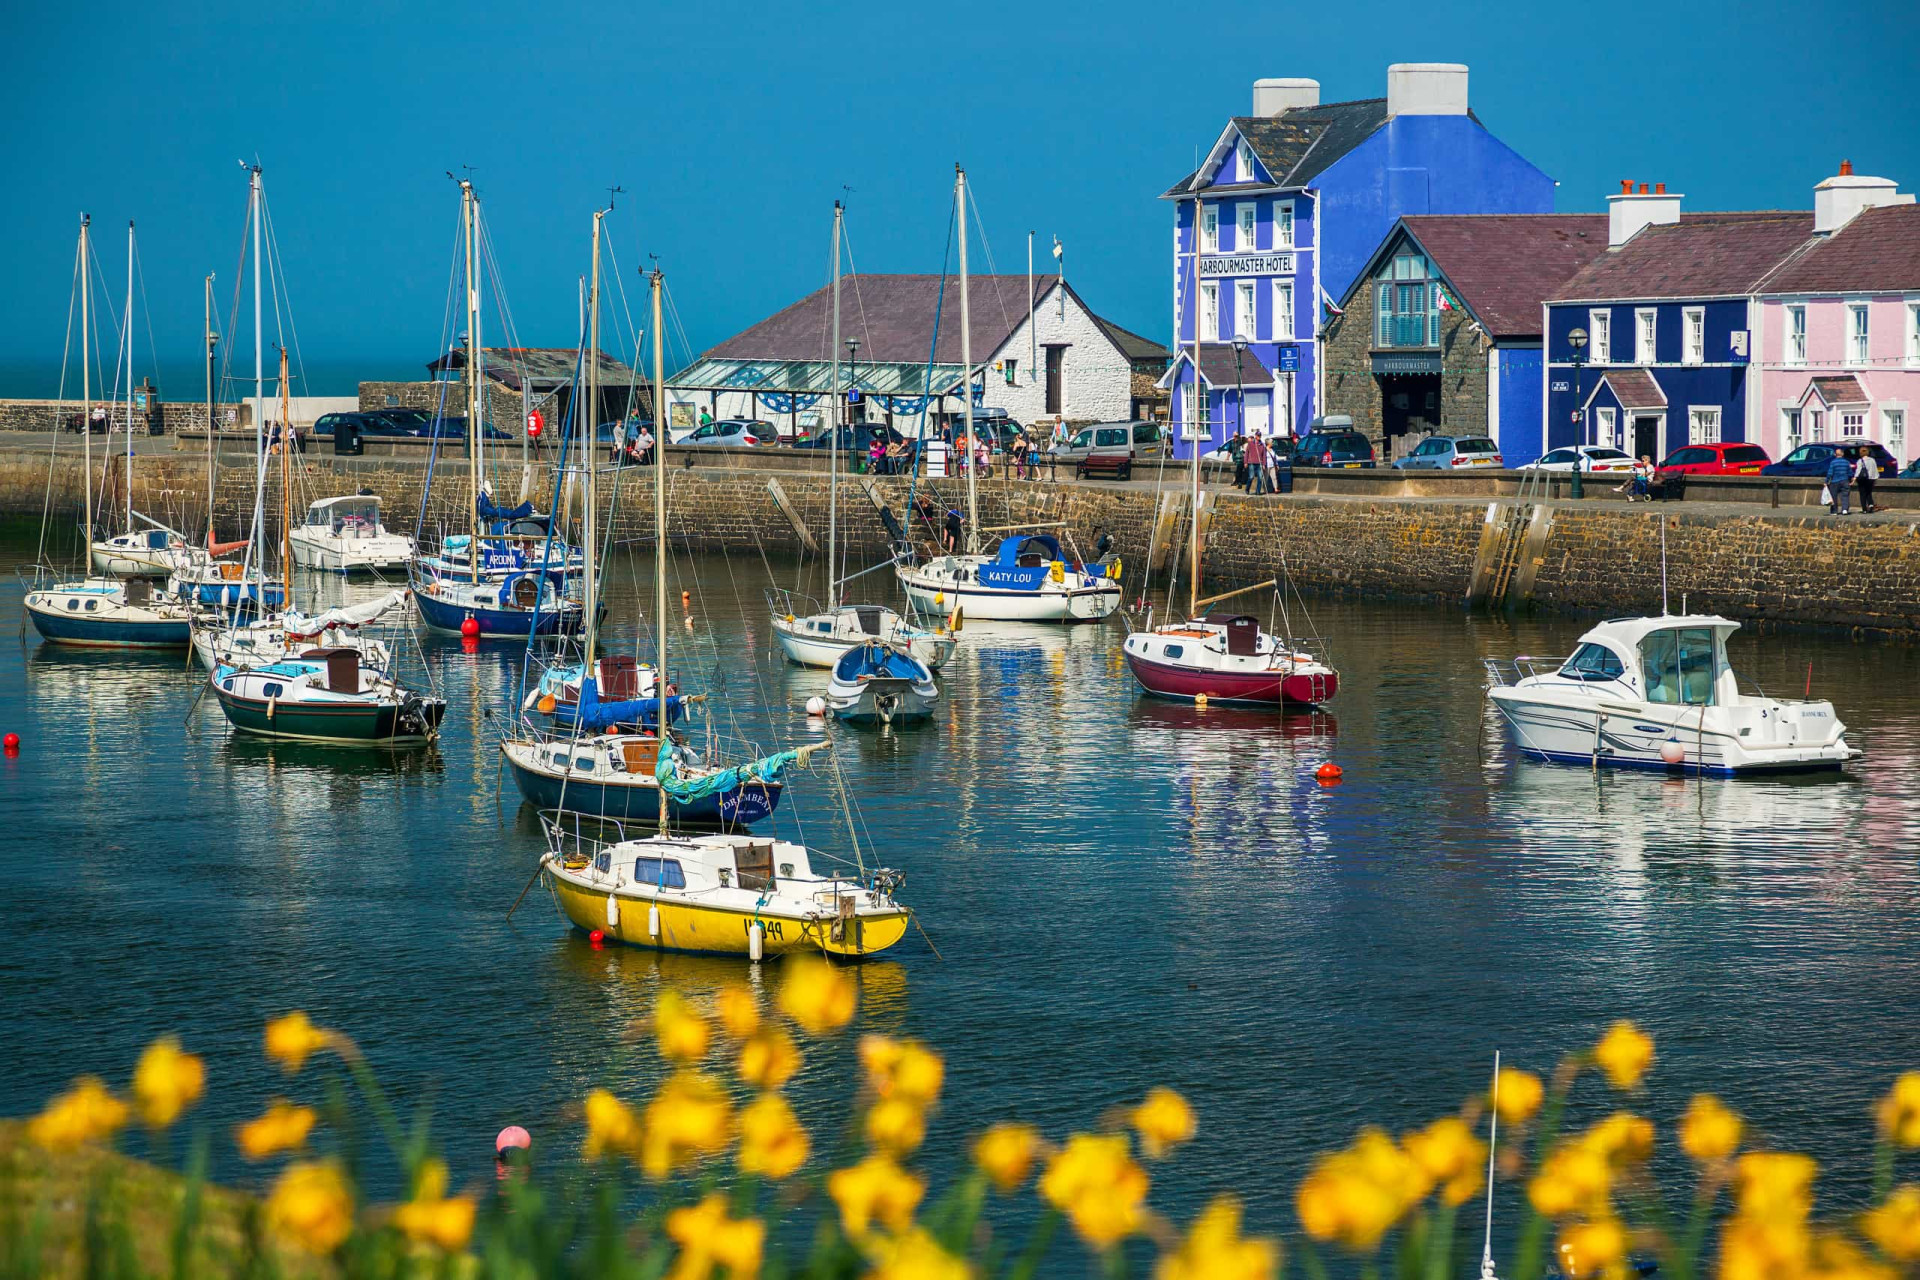 <p>Aberaeron is a historic Welsh fishing town where you will find charming multicolored houses and great sea views. It's a perfect place to get some high-quality fish and chips with mushy peas.</p>